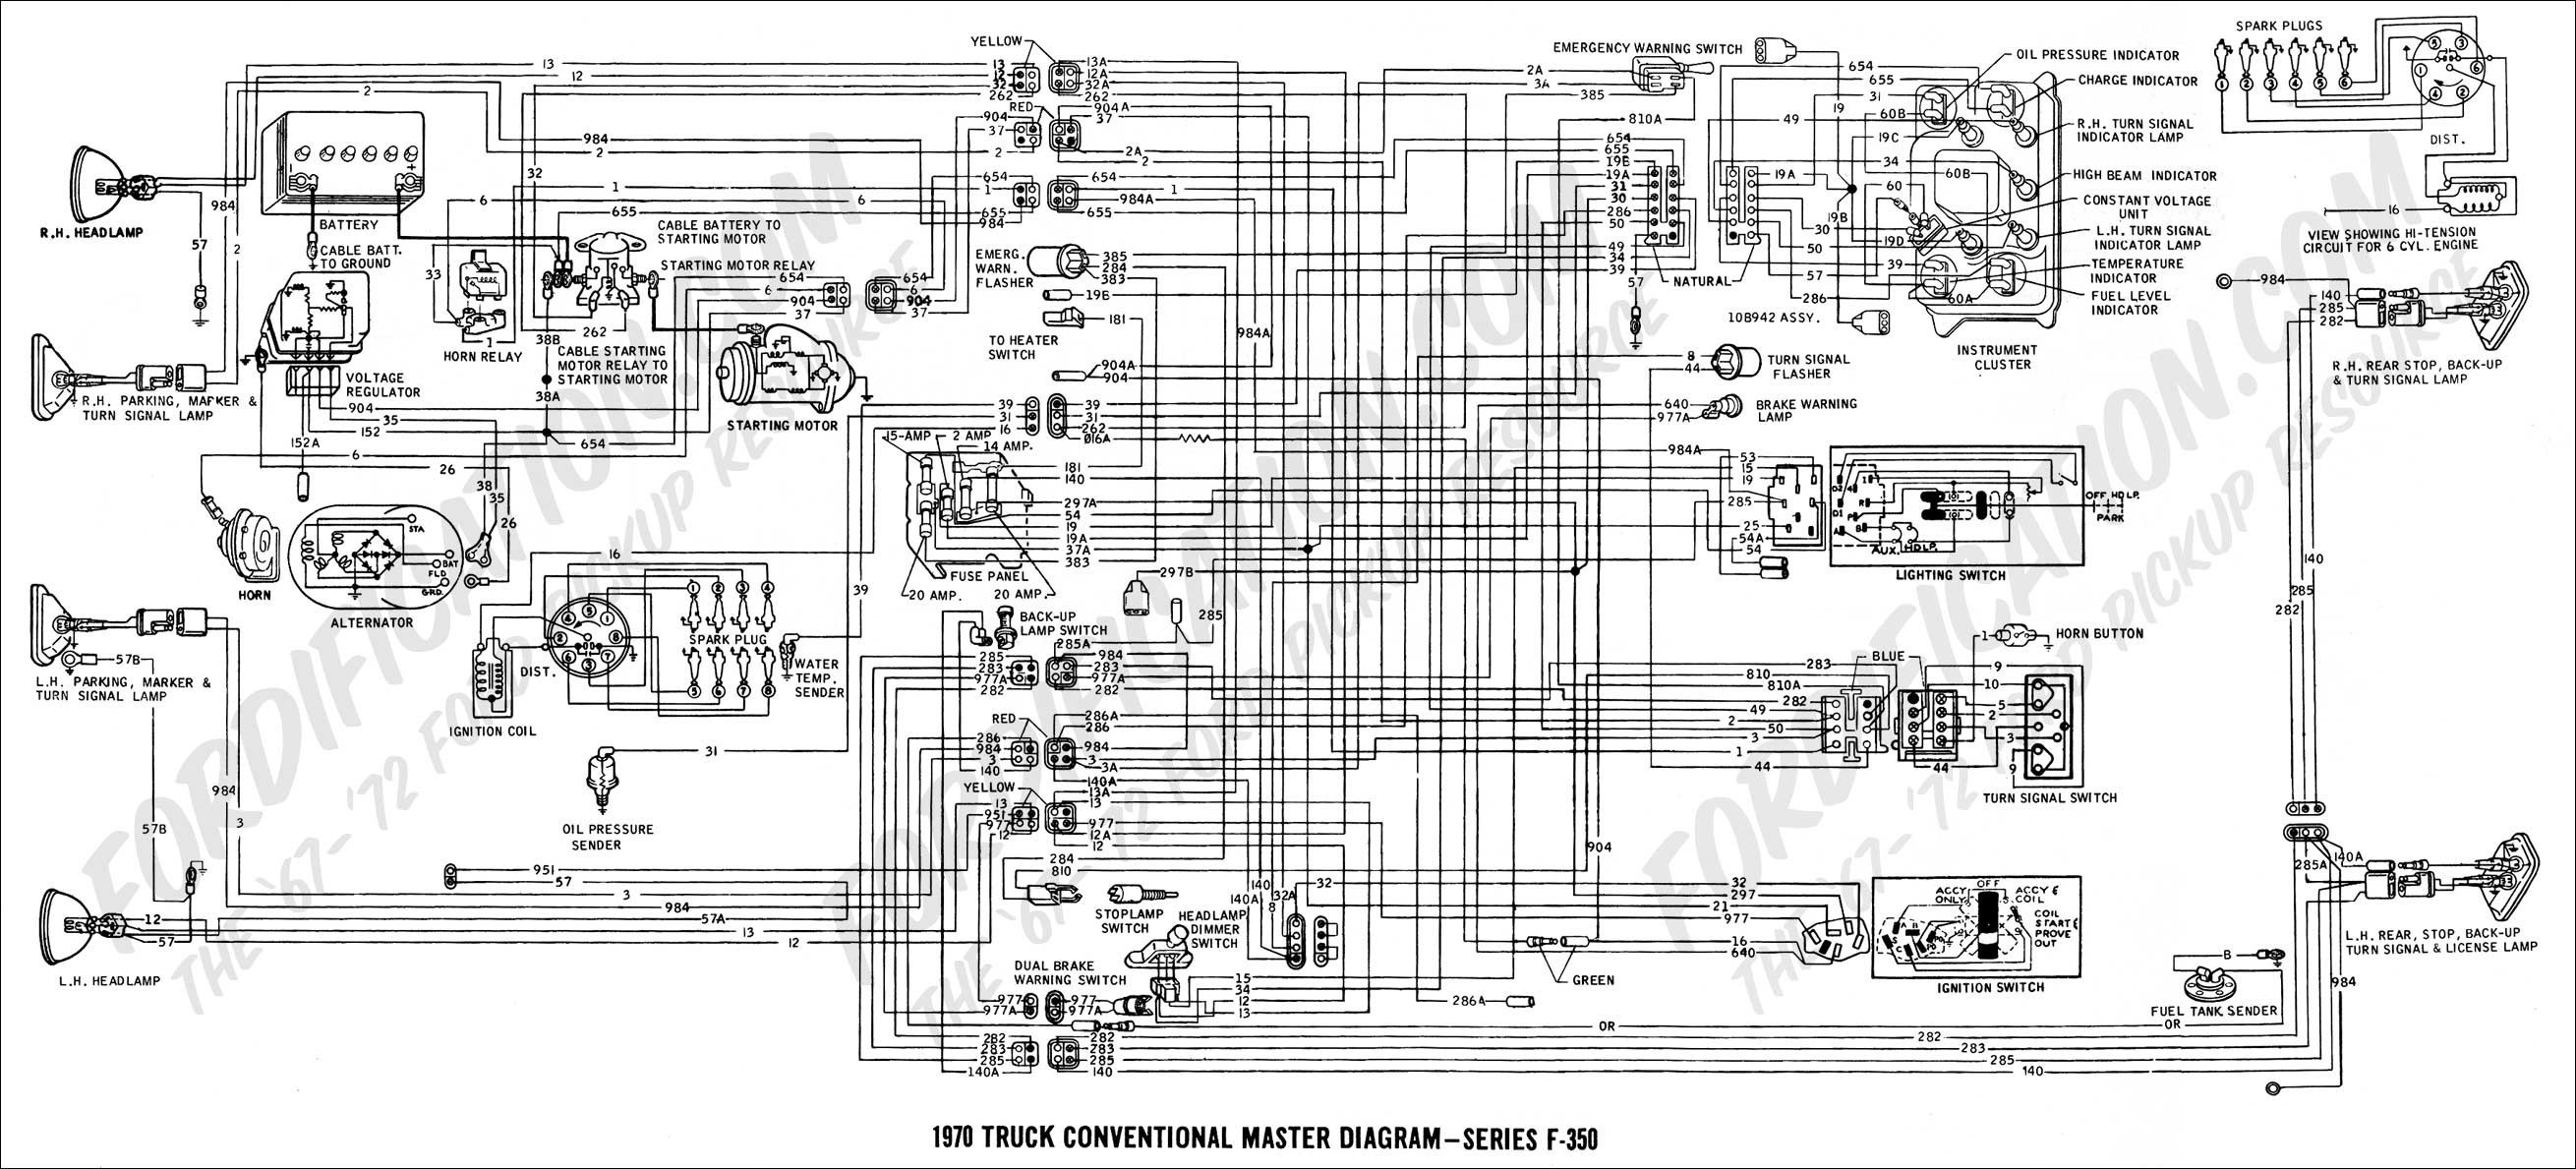 Wiring Diagram for ford Starter Relay Valid Best ford Starter Motor Wiring Diagram